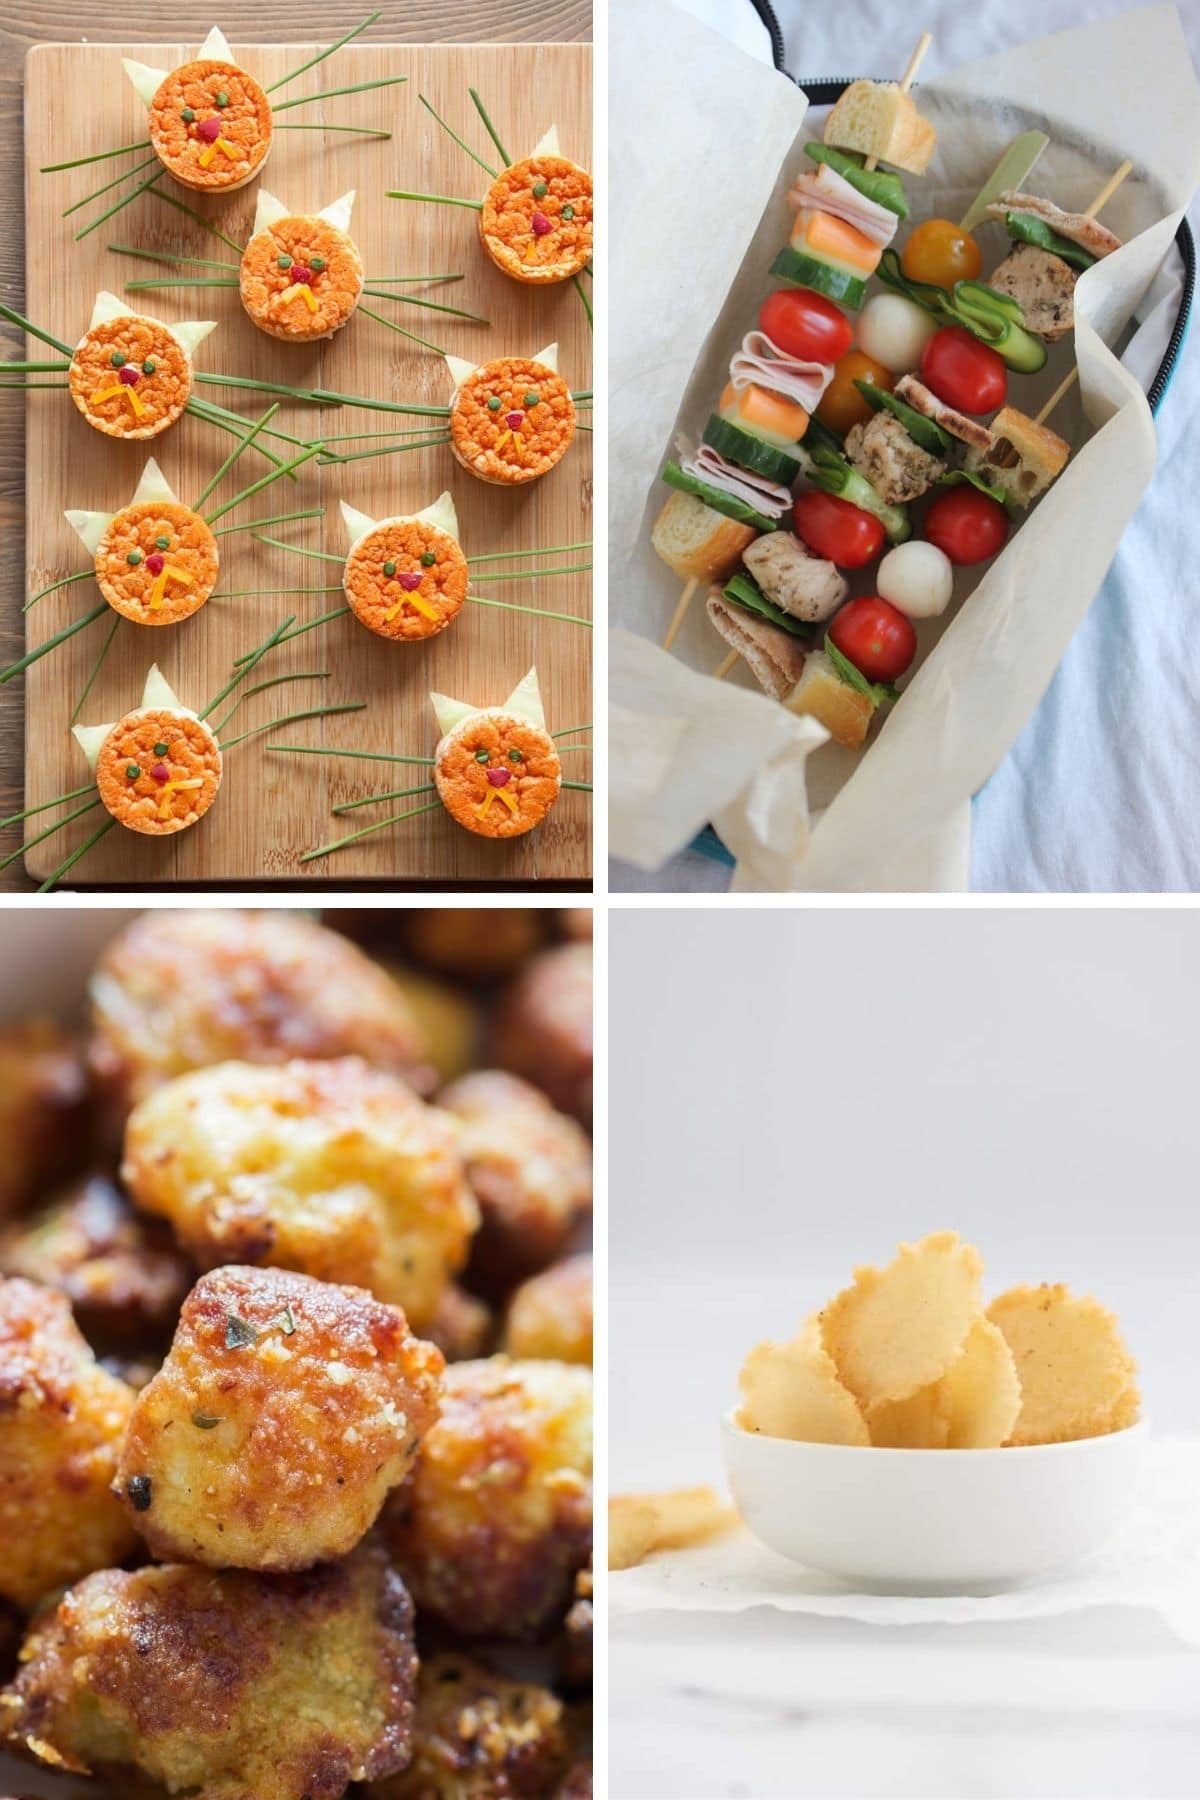 Collage of fun healthy savoury snacks for kids.